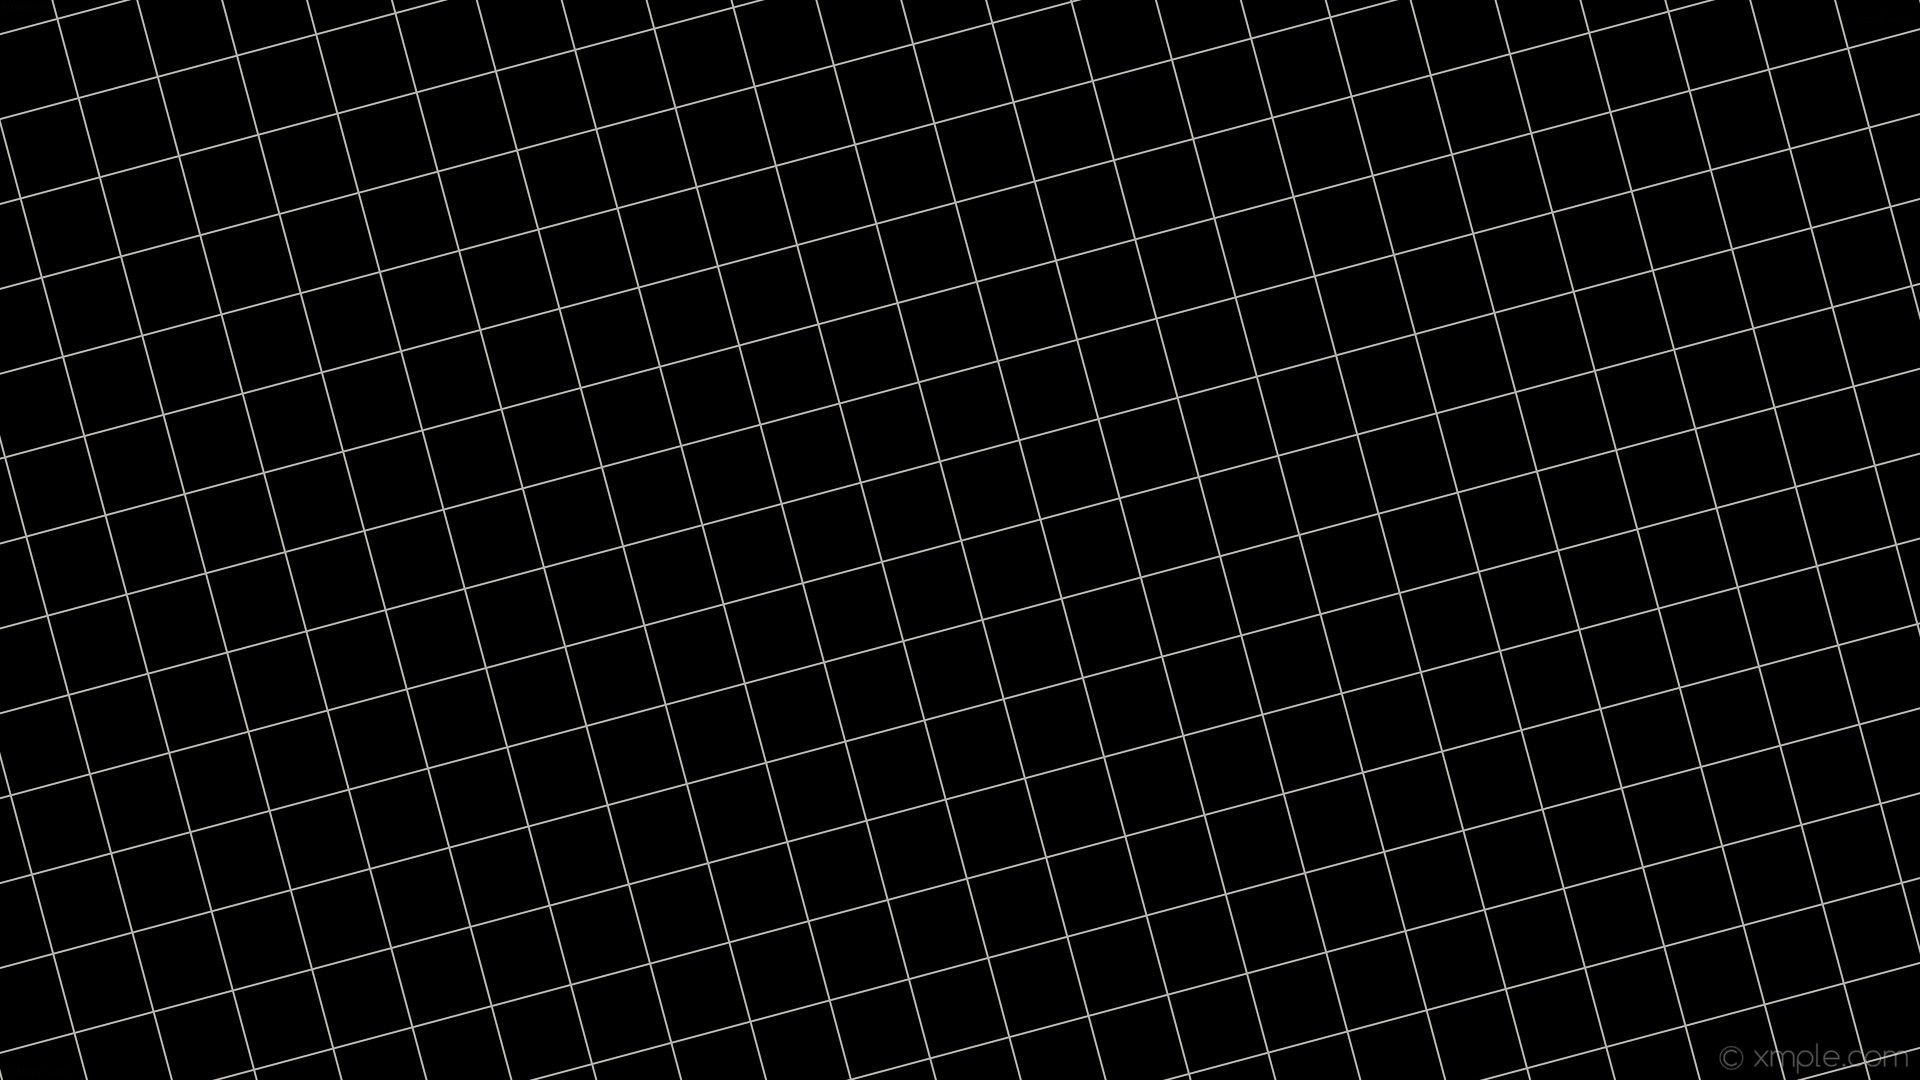 A black and white image of the grid - Grid